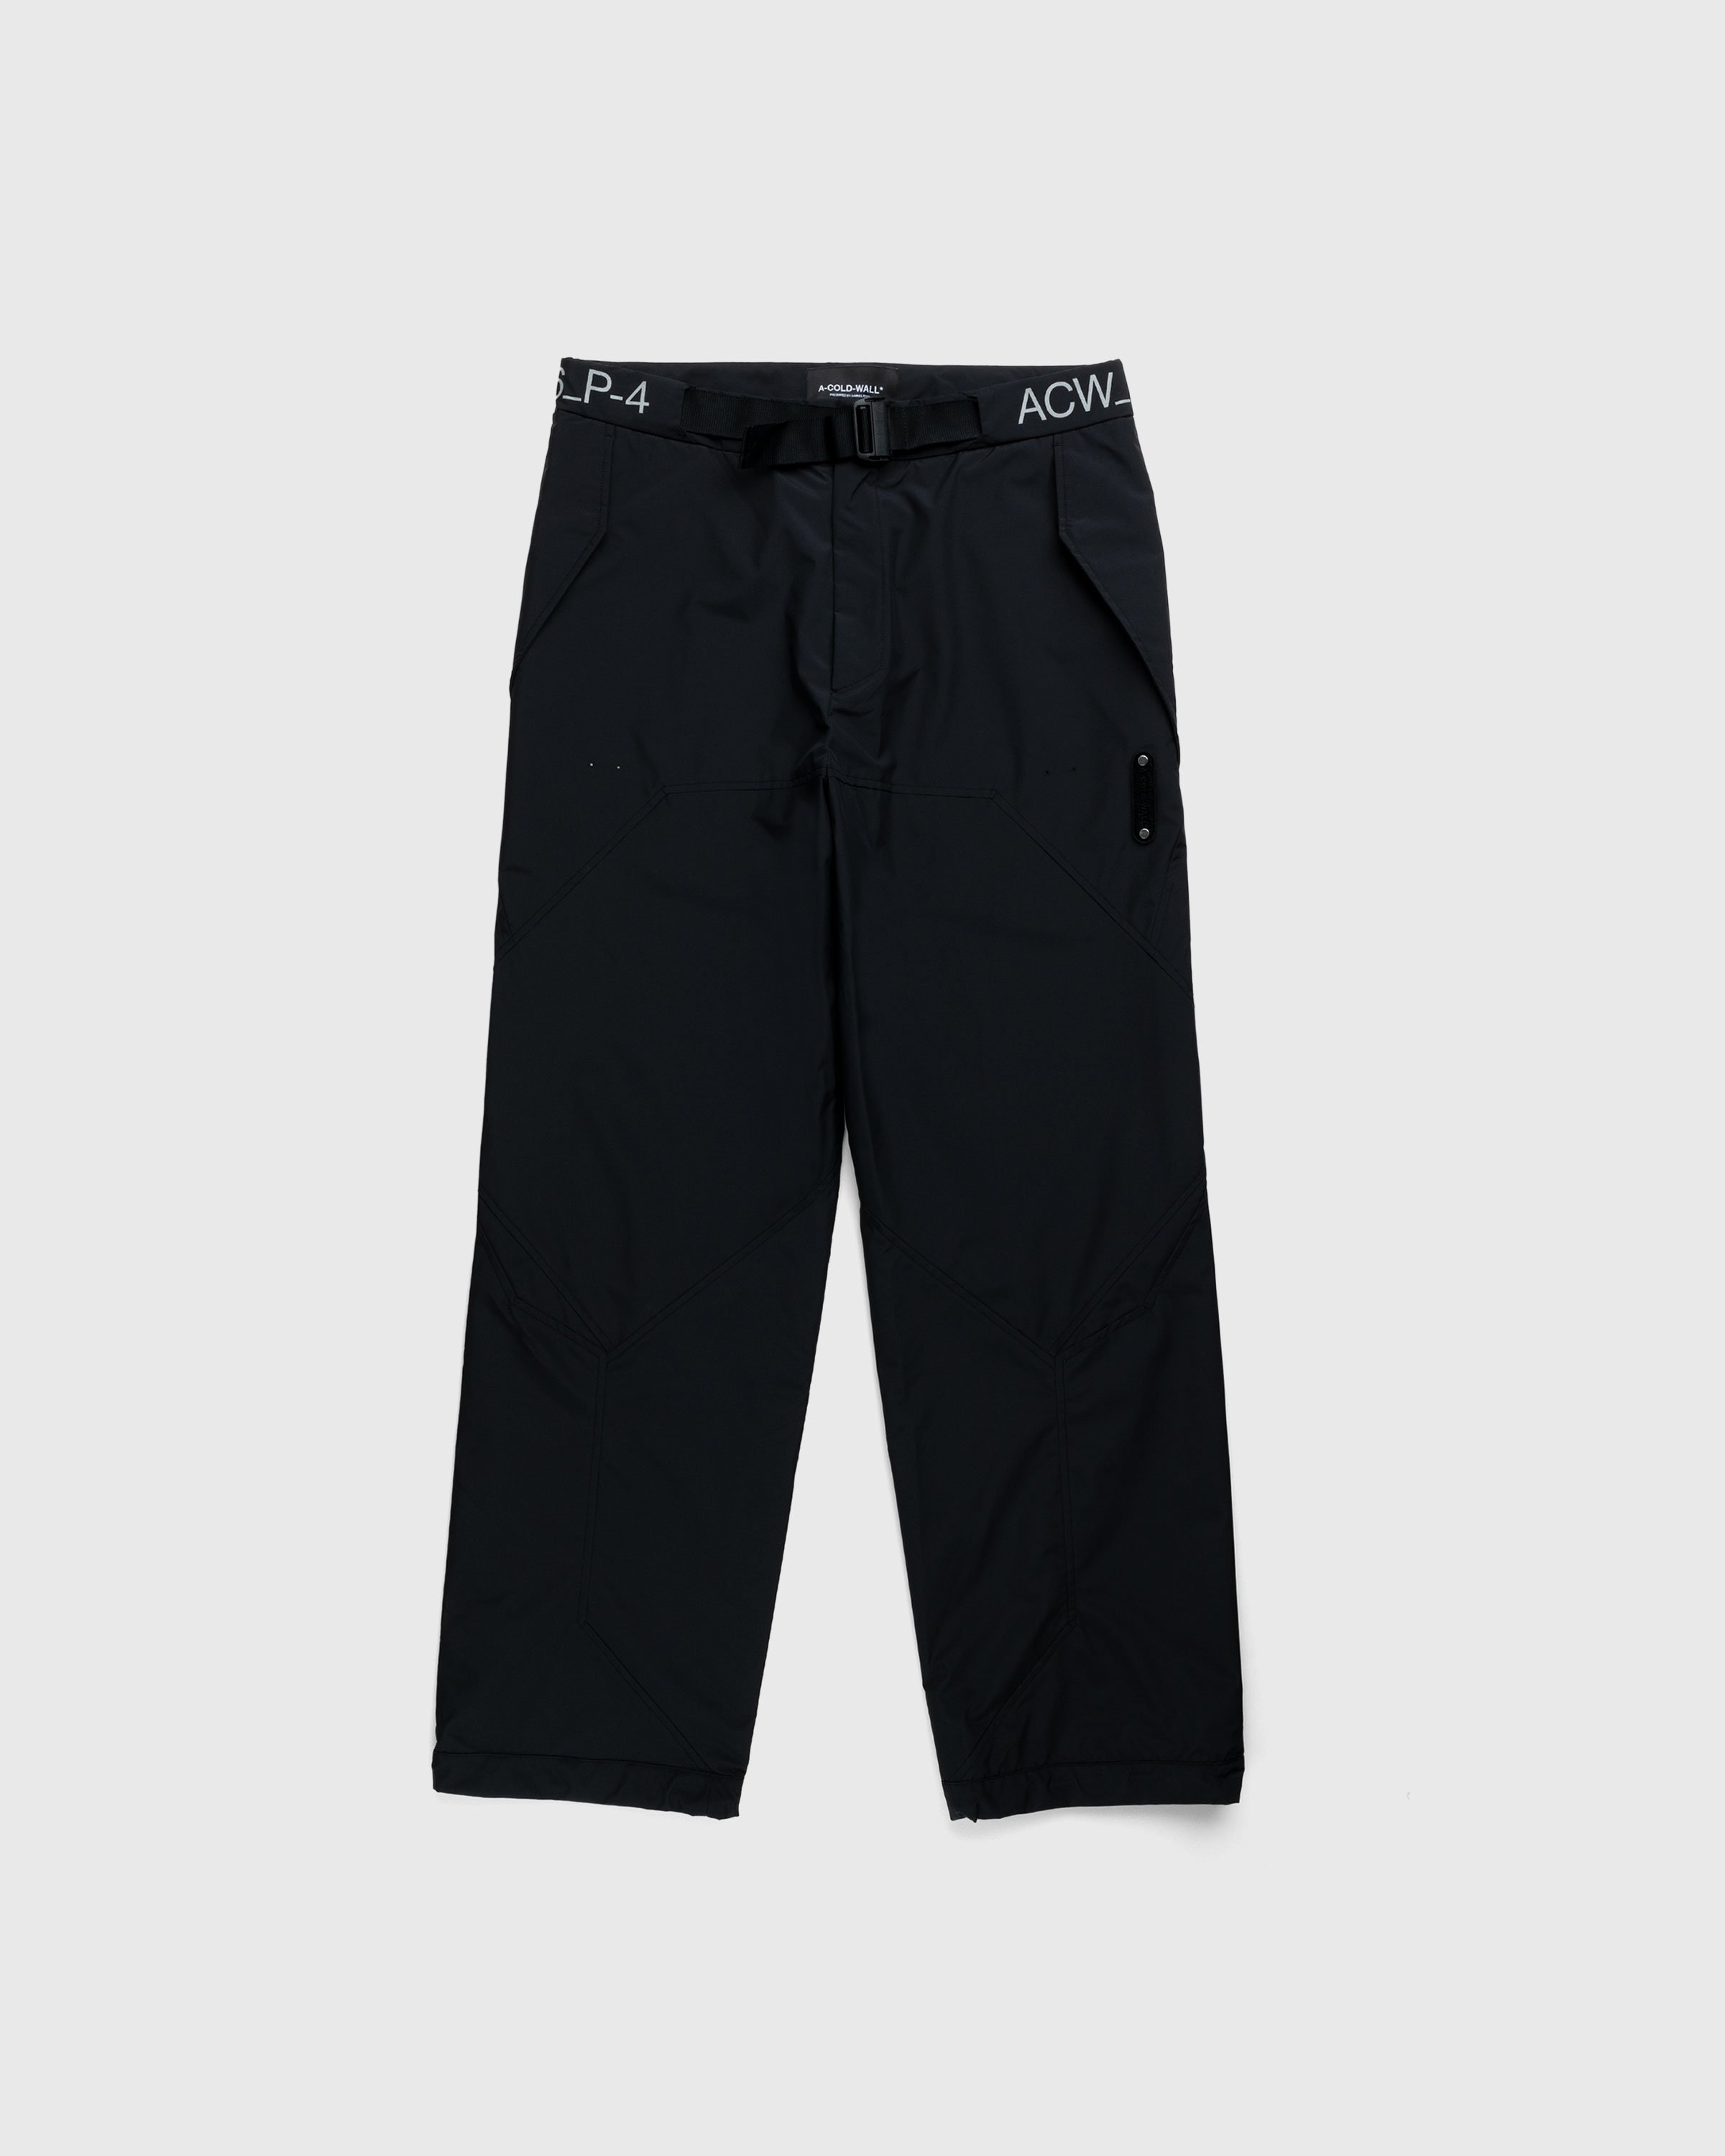 A-Cold-Wall* - Nephin Storm Pants Black - Clothing - Black - Image 1